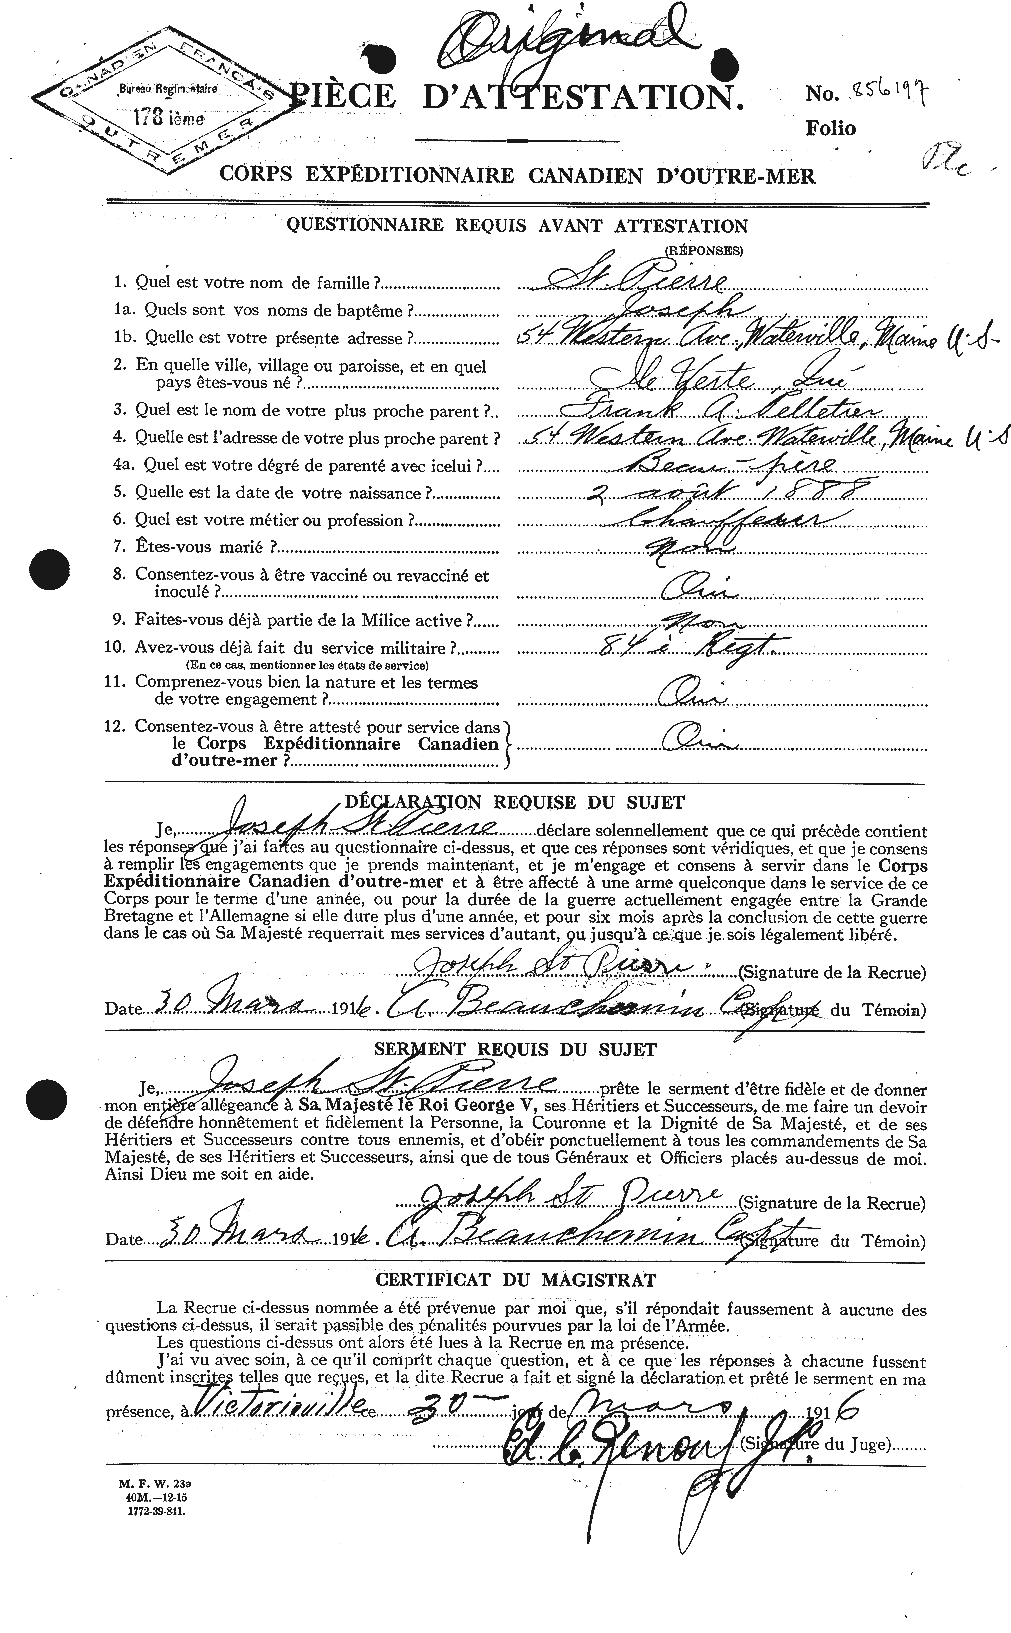 Personnel Records of the First World War - CEF 077682a